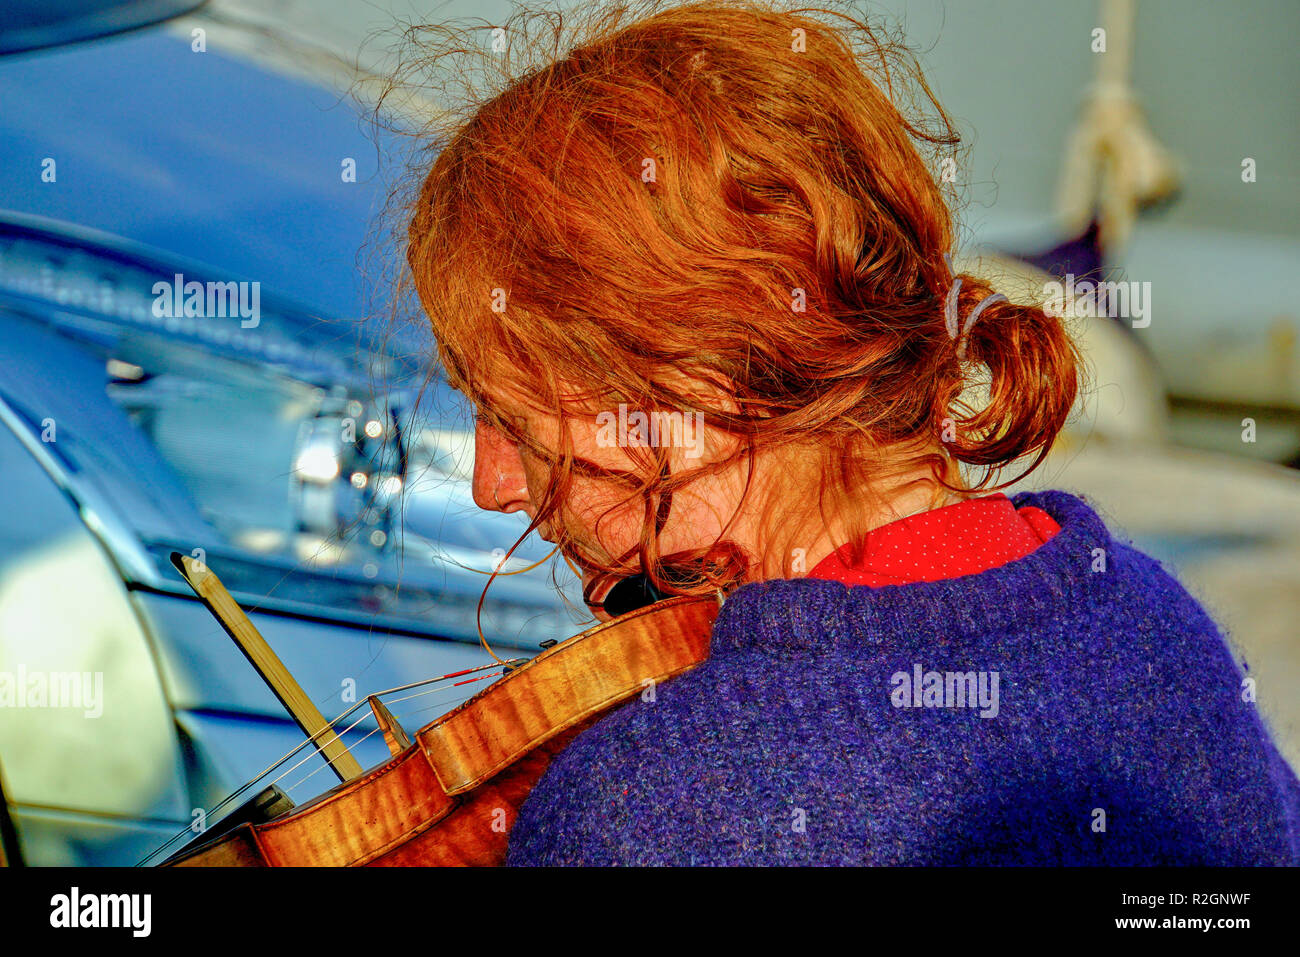 Portrait of ginger haired female violinist Stock Photo